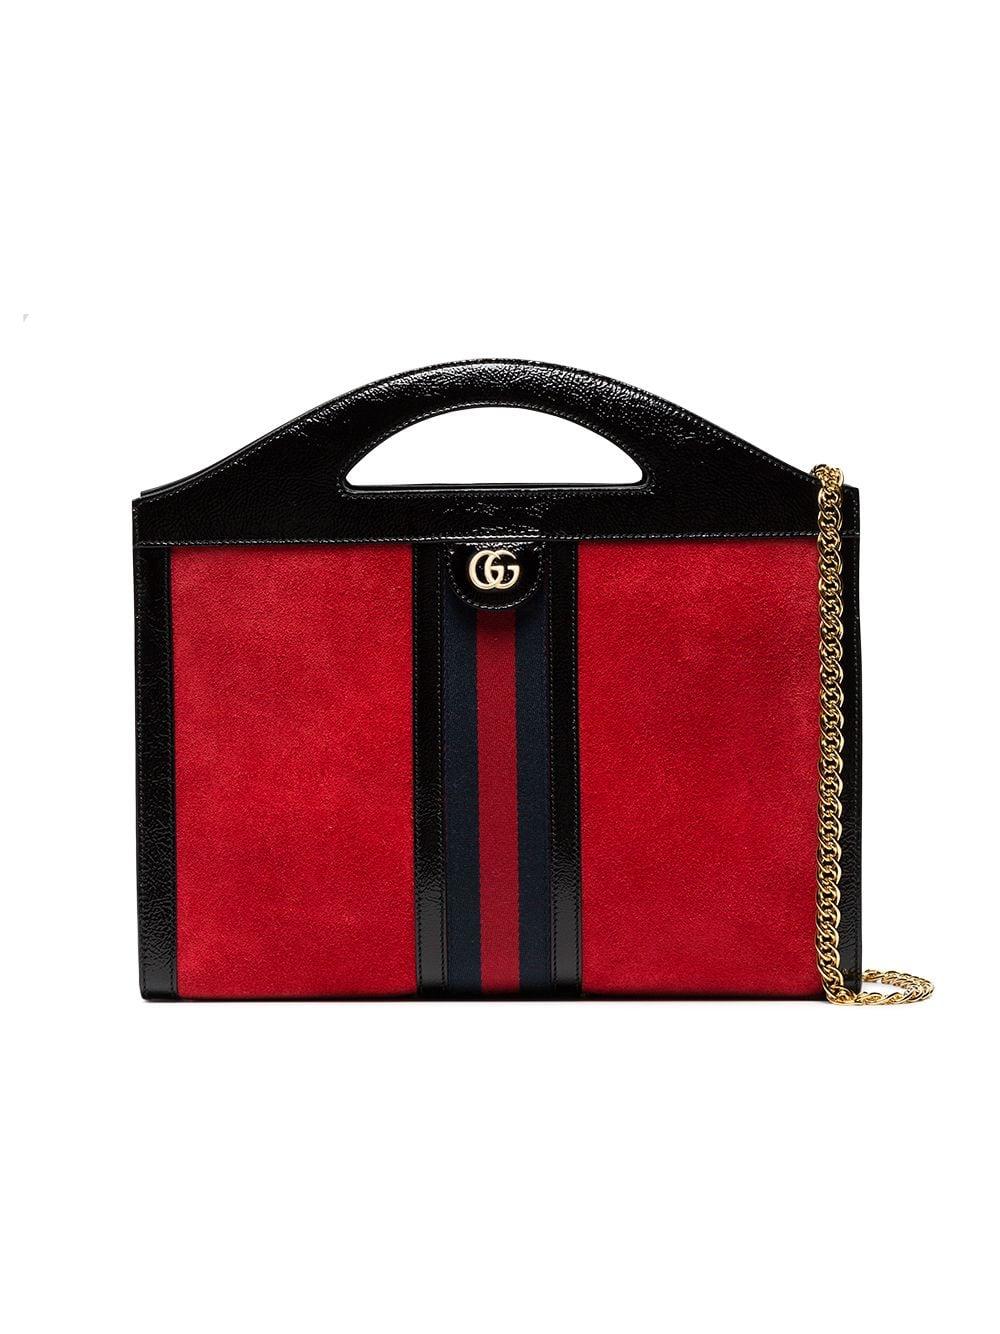 Gucci Red Ophidia Large Suede Leather Shoulder Bag - Lyst